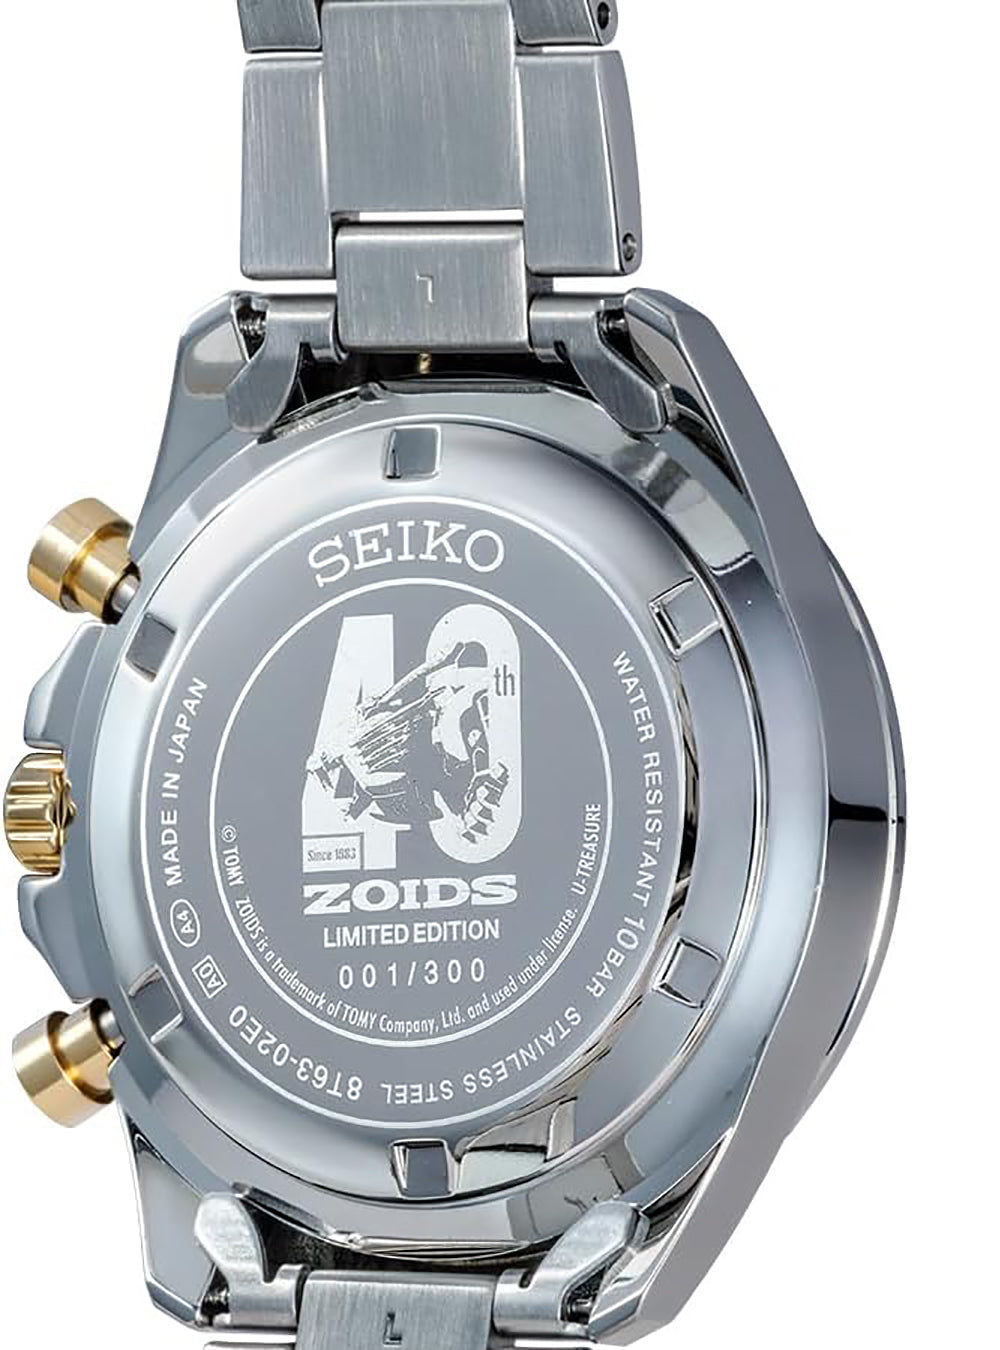 SEIKO × ZOIDS COLLABORATION WATCH 40TH ANNIVERSARY LIMITED EDITION 